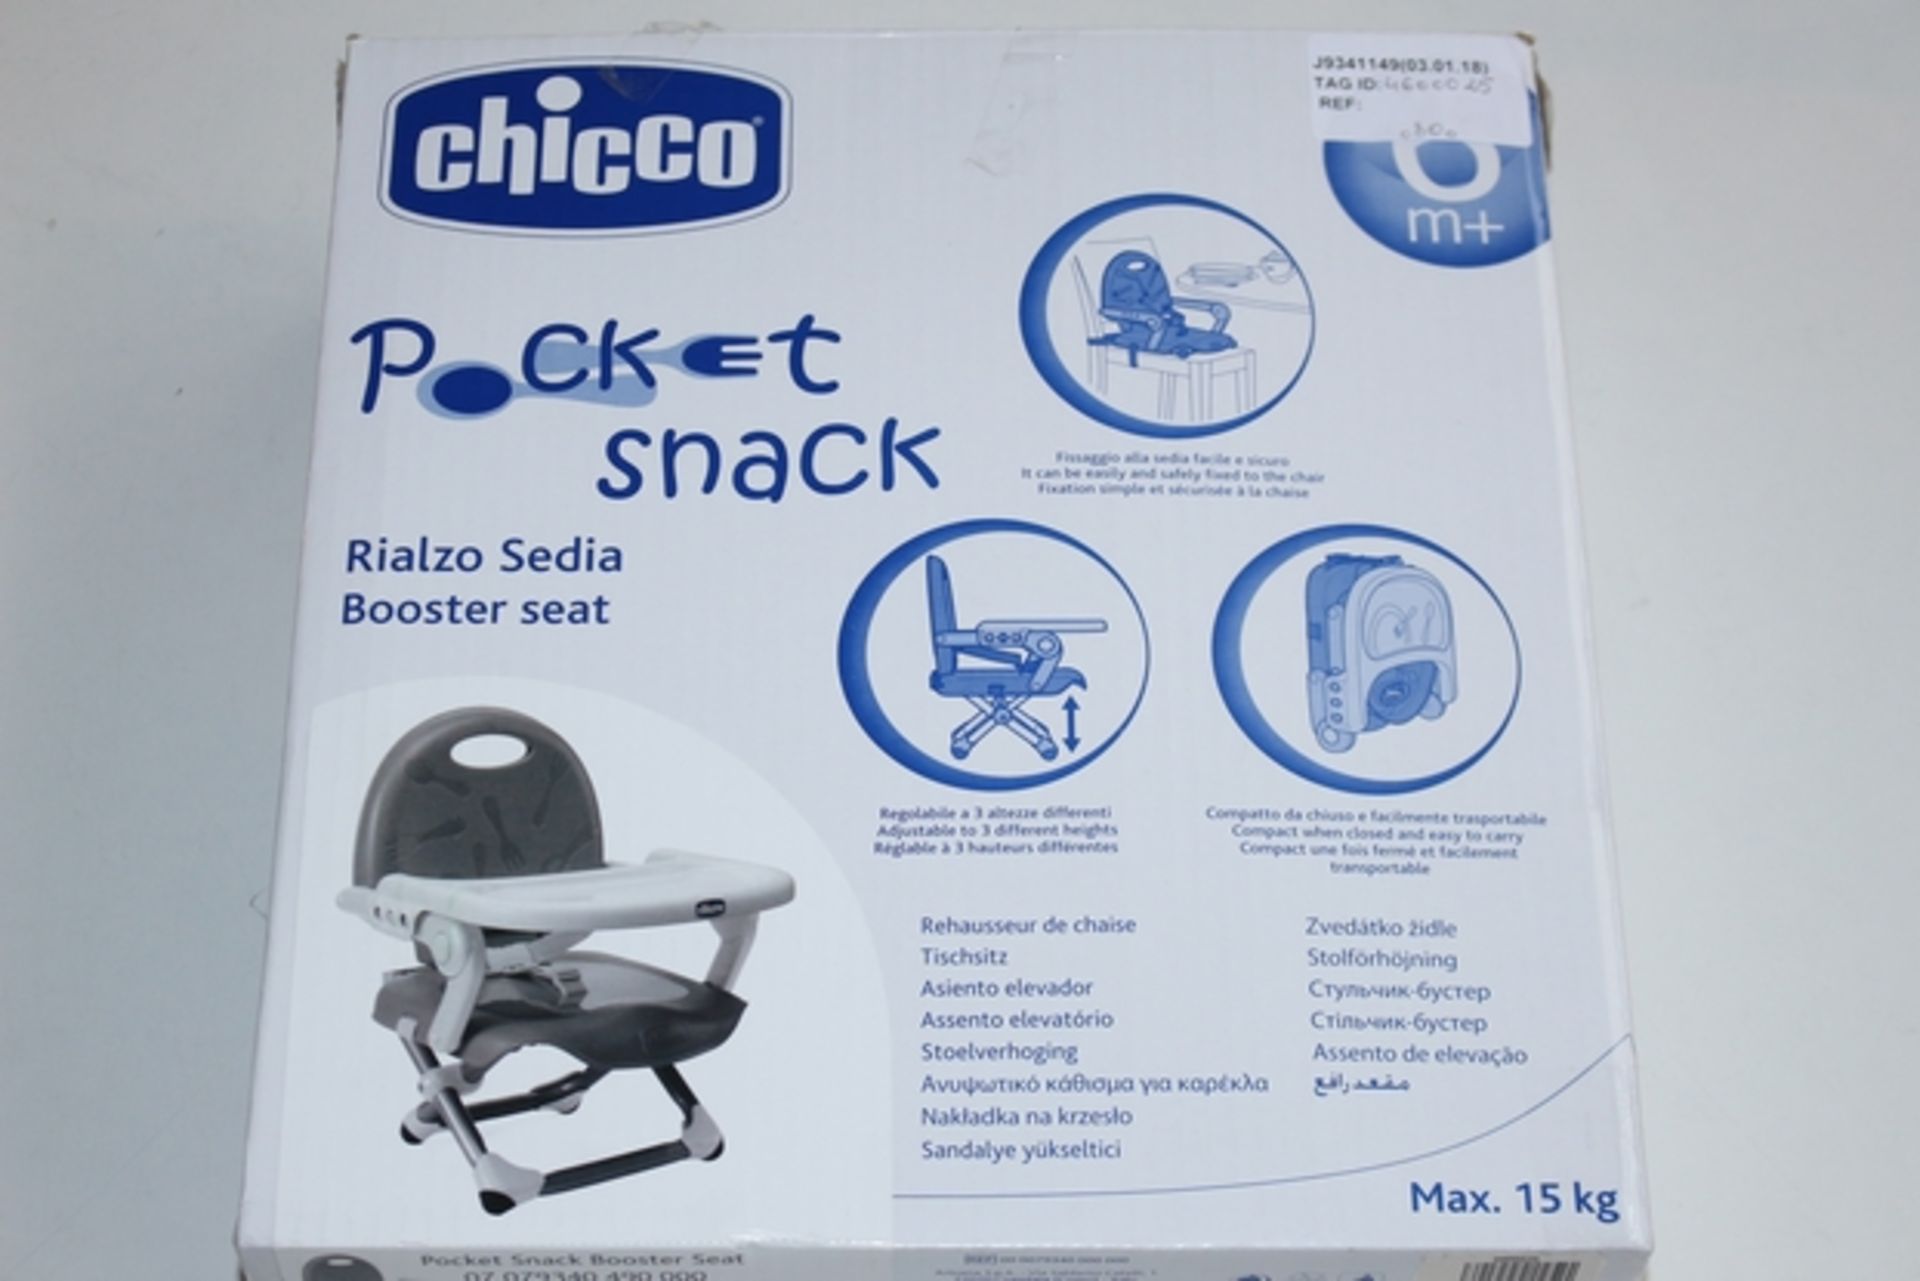 1X CHICCO POCKET SNACK BOOSTER SEAT RRP £30 (JL-9337457) (03/01/18) (4600025)